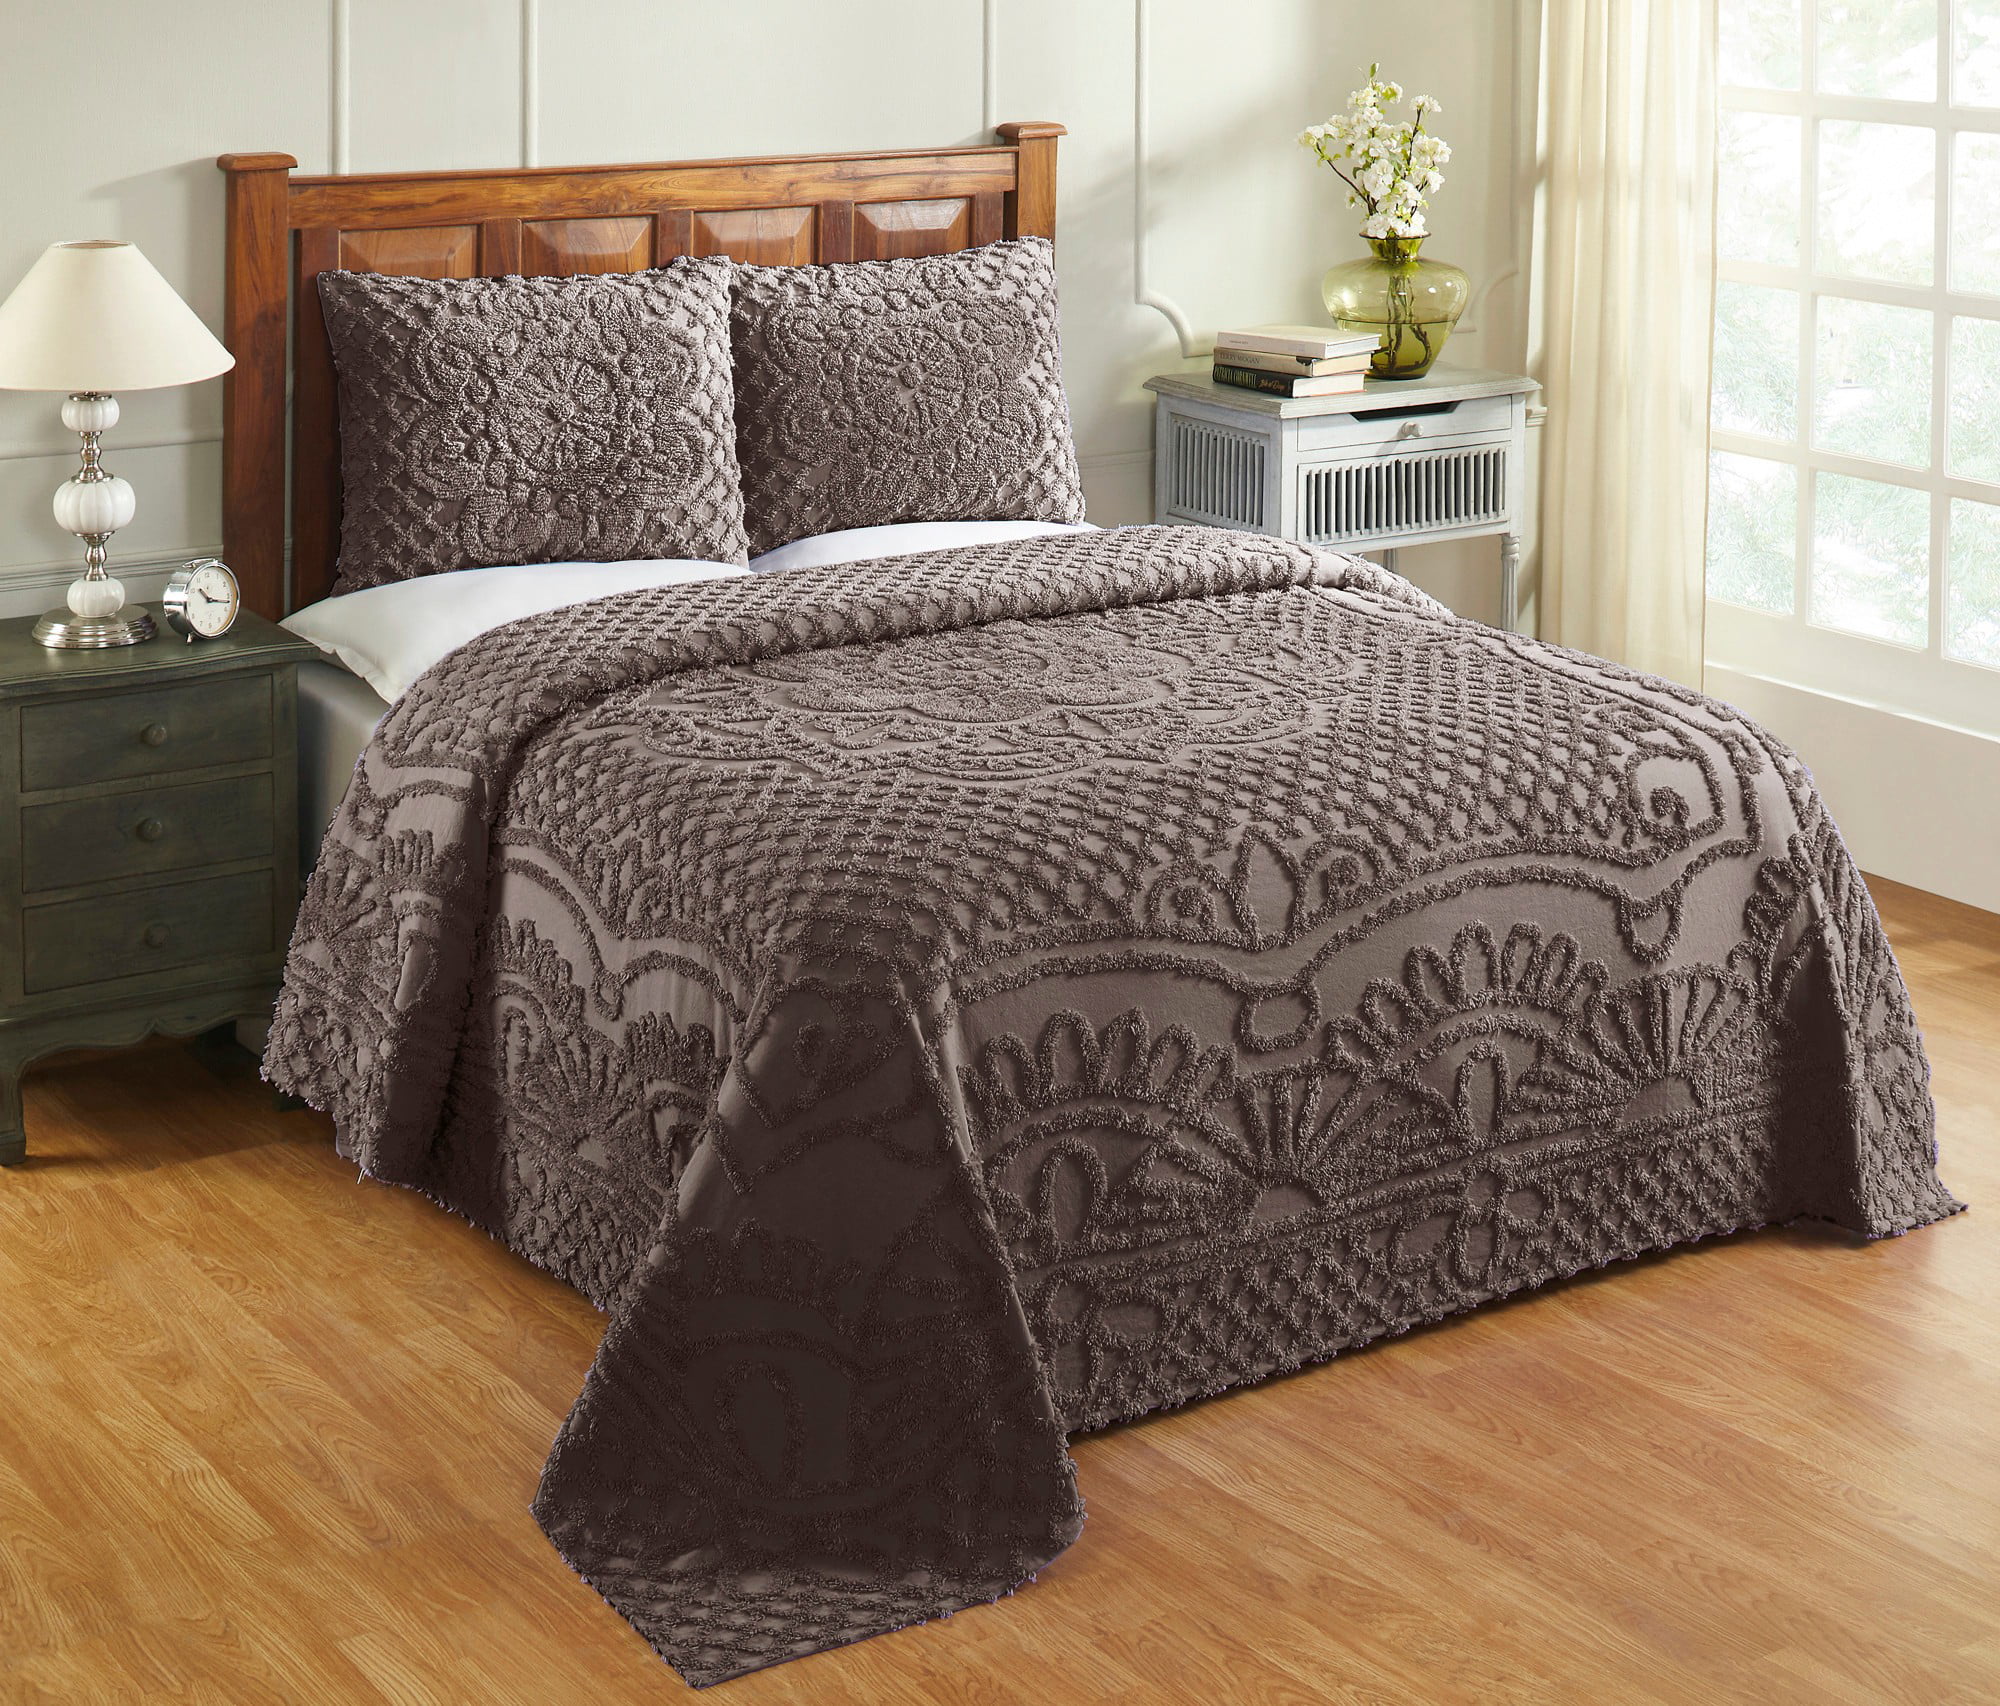 TREVOR TUFTED CHENILLE BEDSPREAD AND PILLOW SHAM COMPLETE SET ALL COTTON 